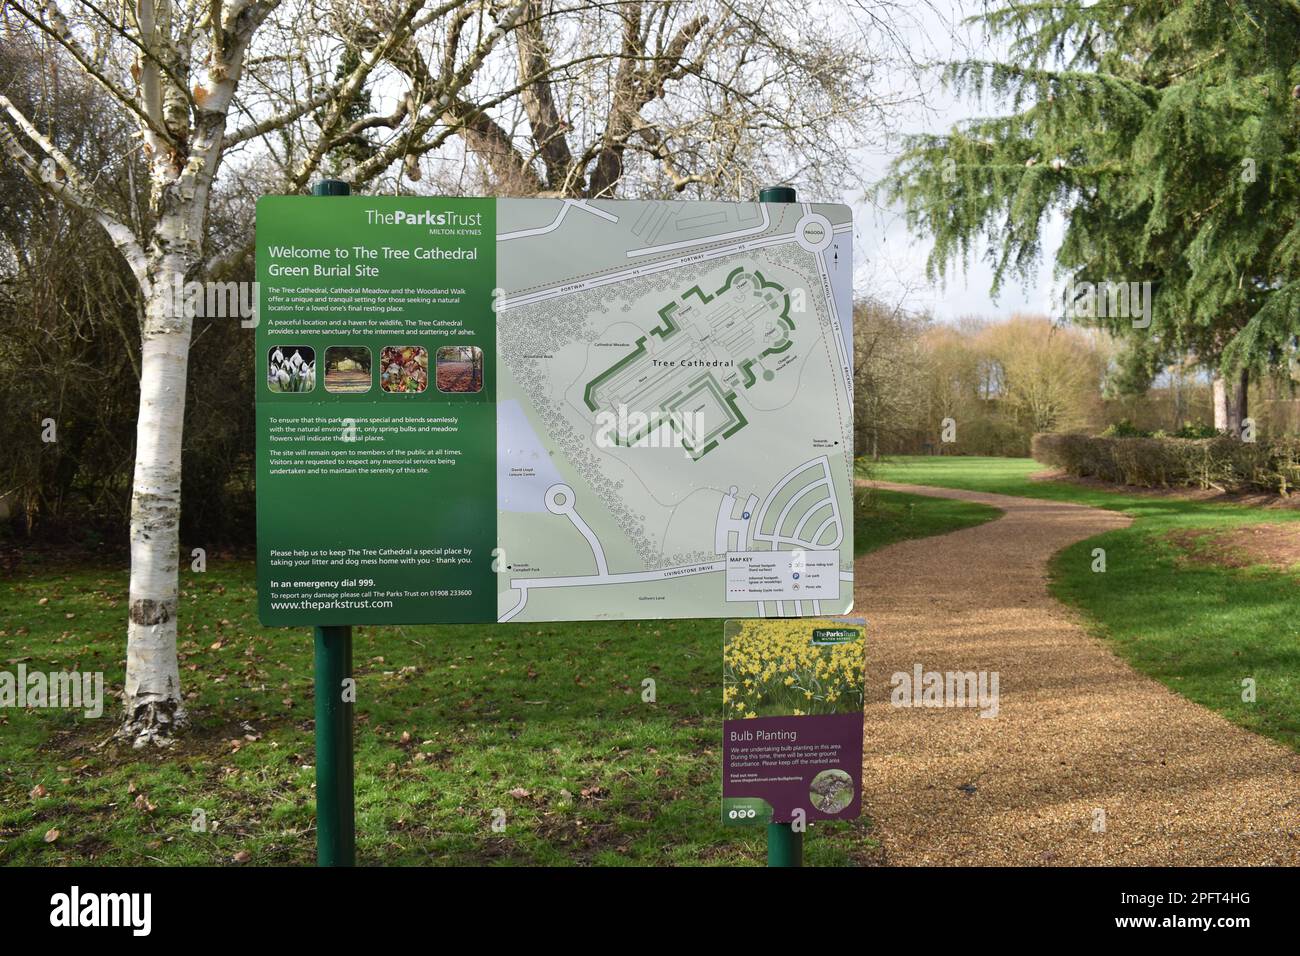 A sign for the Green Burial Site at The Tree Cathedral in Milton Keynes. Stock Photo